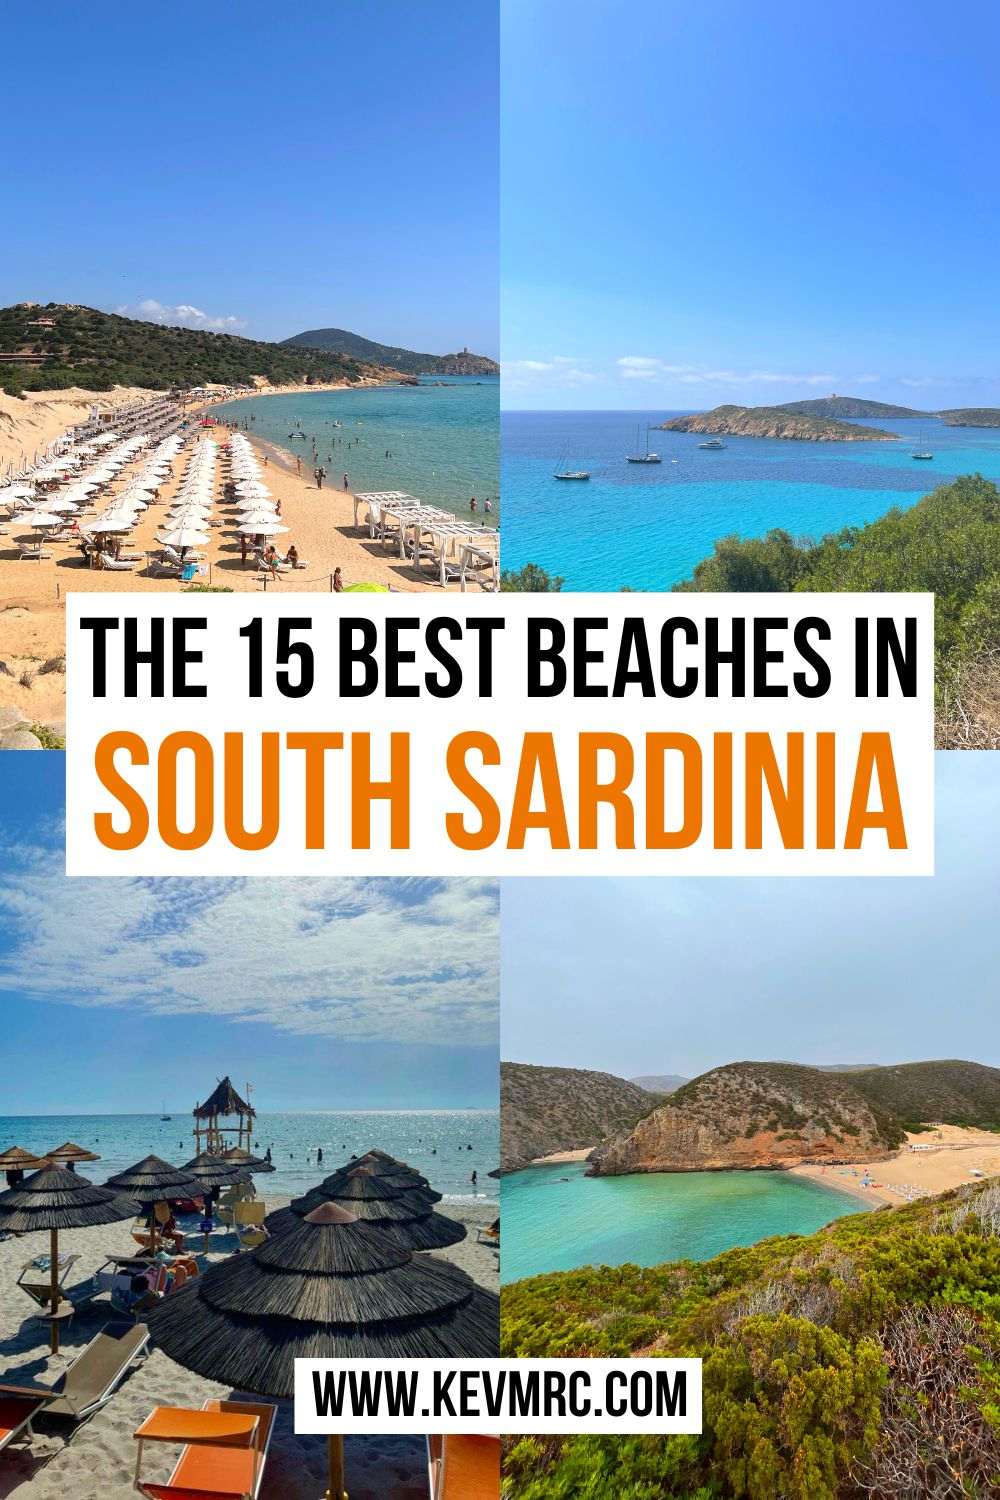 Sardinia is world famous for its wonderful crystal clear beaches. If you are traveling the south of the island, discover in this post the 15 best beaches in southern Sardinia, with a free map to find them easily. best sardinia beaches | sardinia beach | south sardinia beaches | sardinia beach beautiful places | best beaches in sardinia | sardinia beaches map | sardinia italy beaches #sardiniabeaches #southsardinia